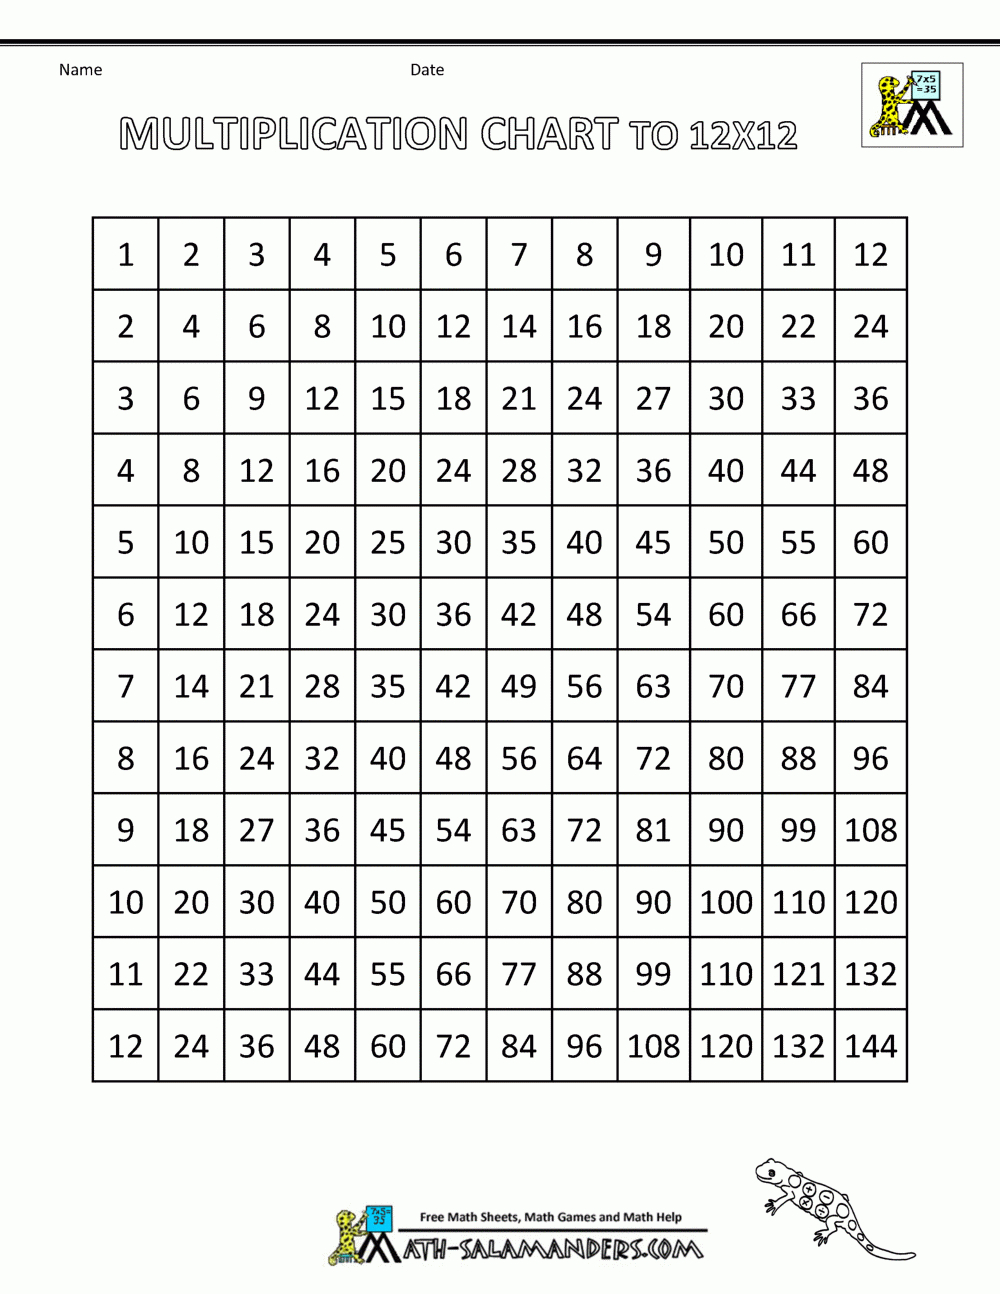 Times Table Grid To 12X12 for Printable Multiplication Squares Game